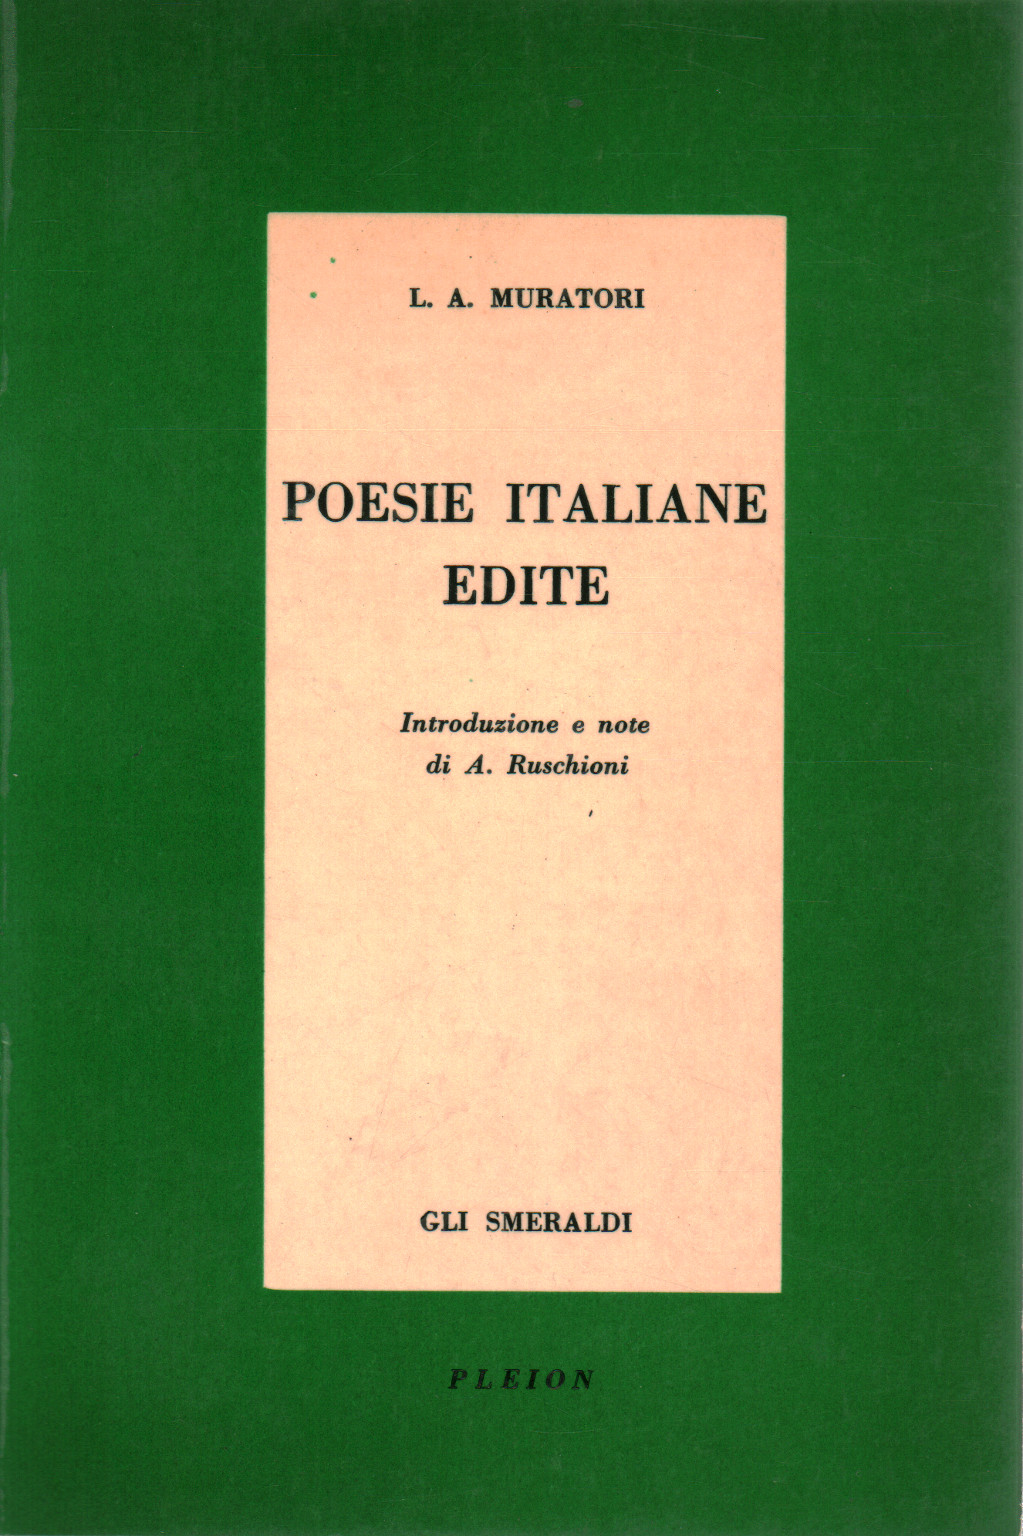 Poems in Italian, published, s.a.